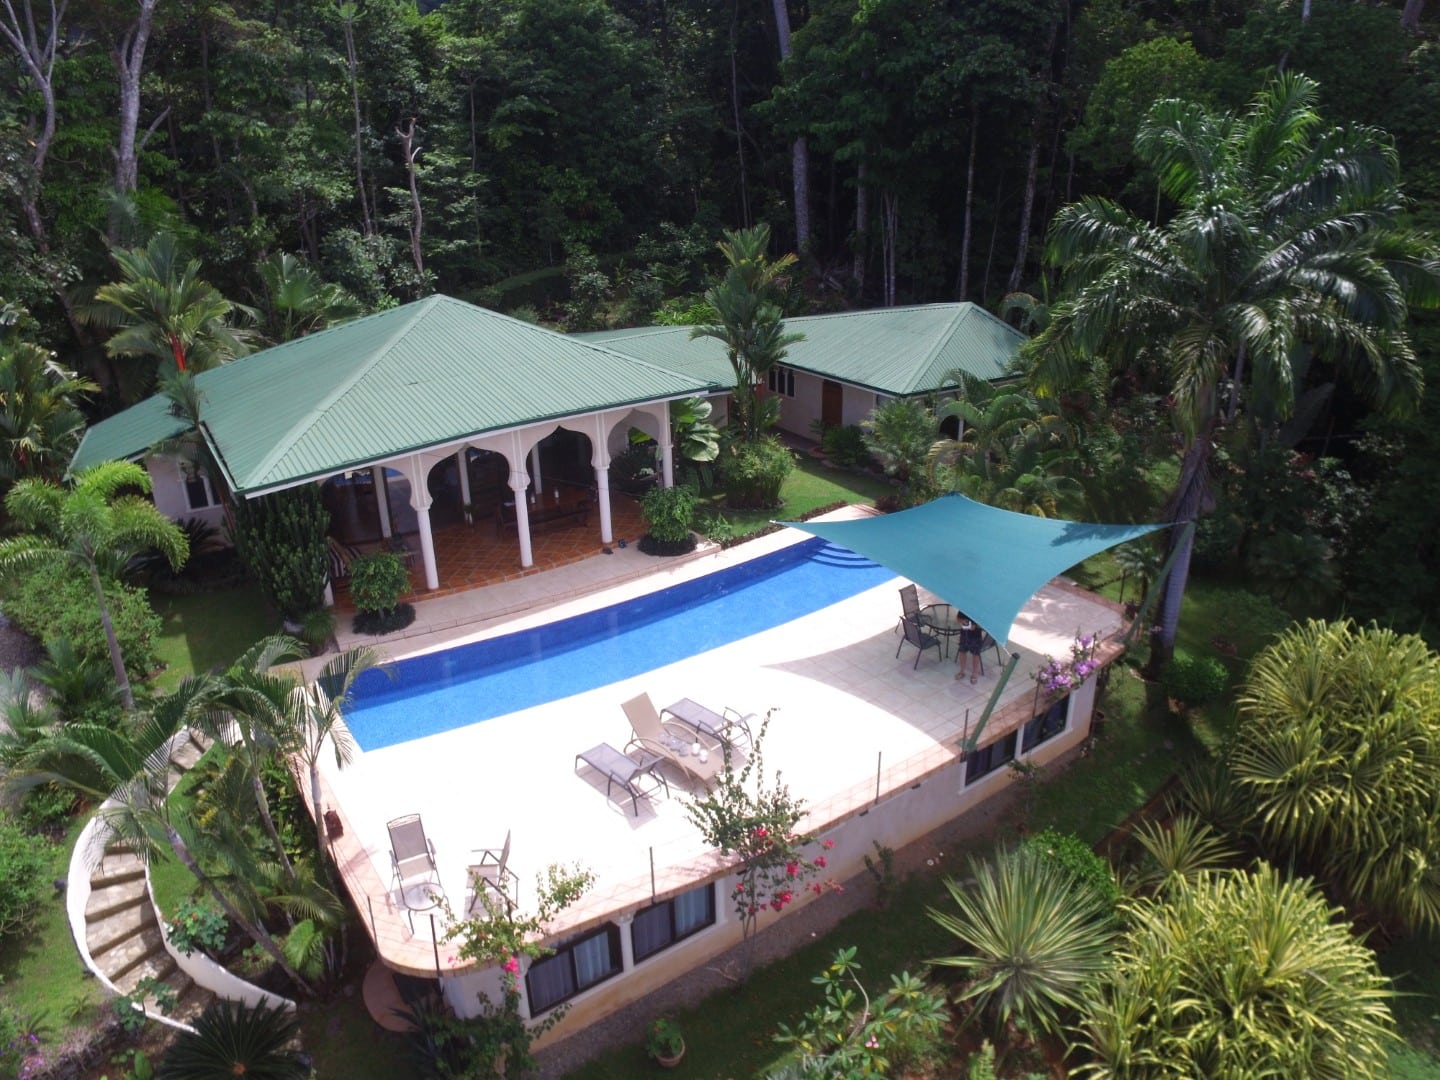 1.75 ACRES - 4 Bedroom Ocean View Home With Pool Surrounded By Jungle!!!